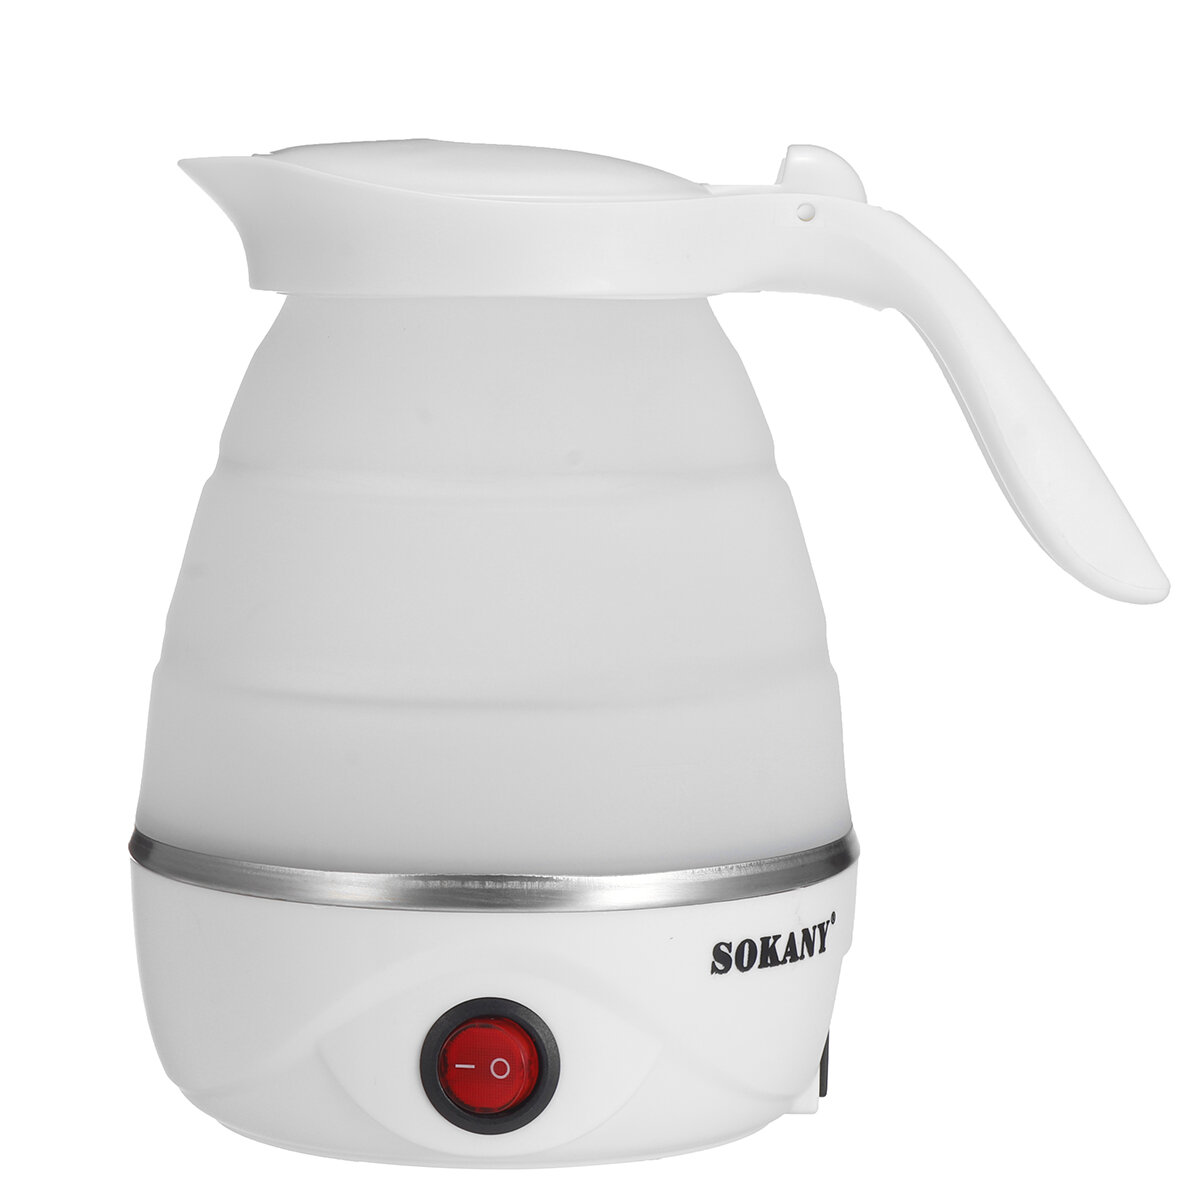 SOKANY 600W 700ml Compact Electric Kettle Silicone Foldable Portable Travel Hot Water Heating Boiler